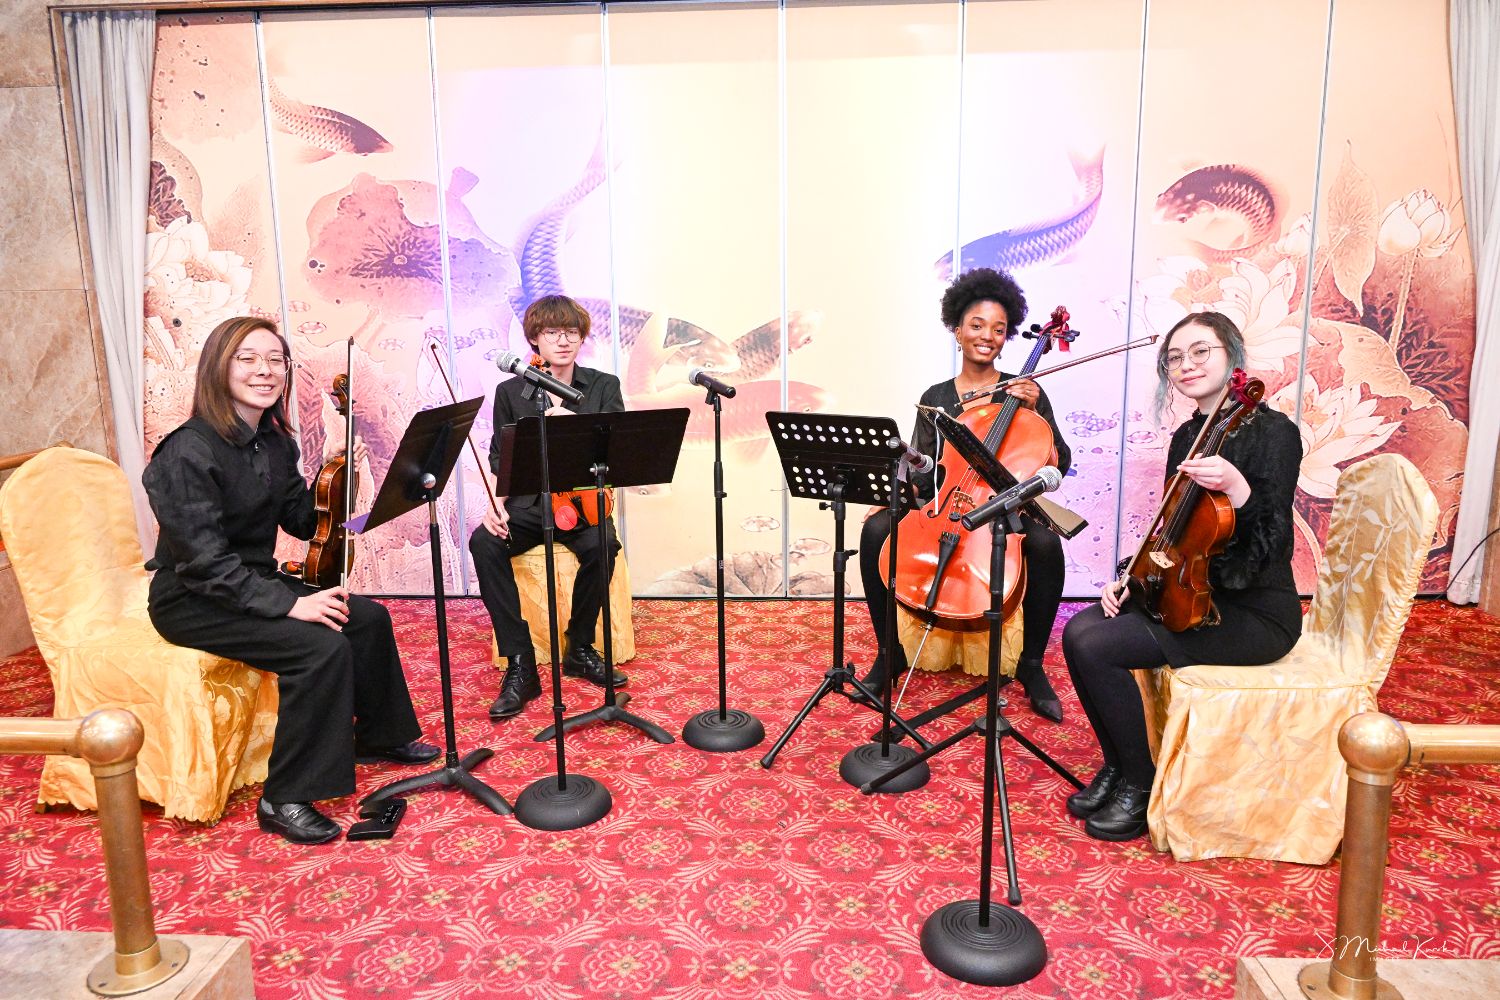 PHOTO: J. Michael Kwok | The South Pasadenan | The Chamber Ensemble from the LA County High School for the Arts performed for the guests. From L-R are Akirin Au, Julian Rife, Amirah Janelle Thomas and Fern Ilarraza.